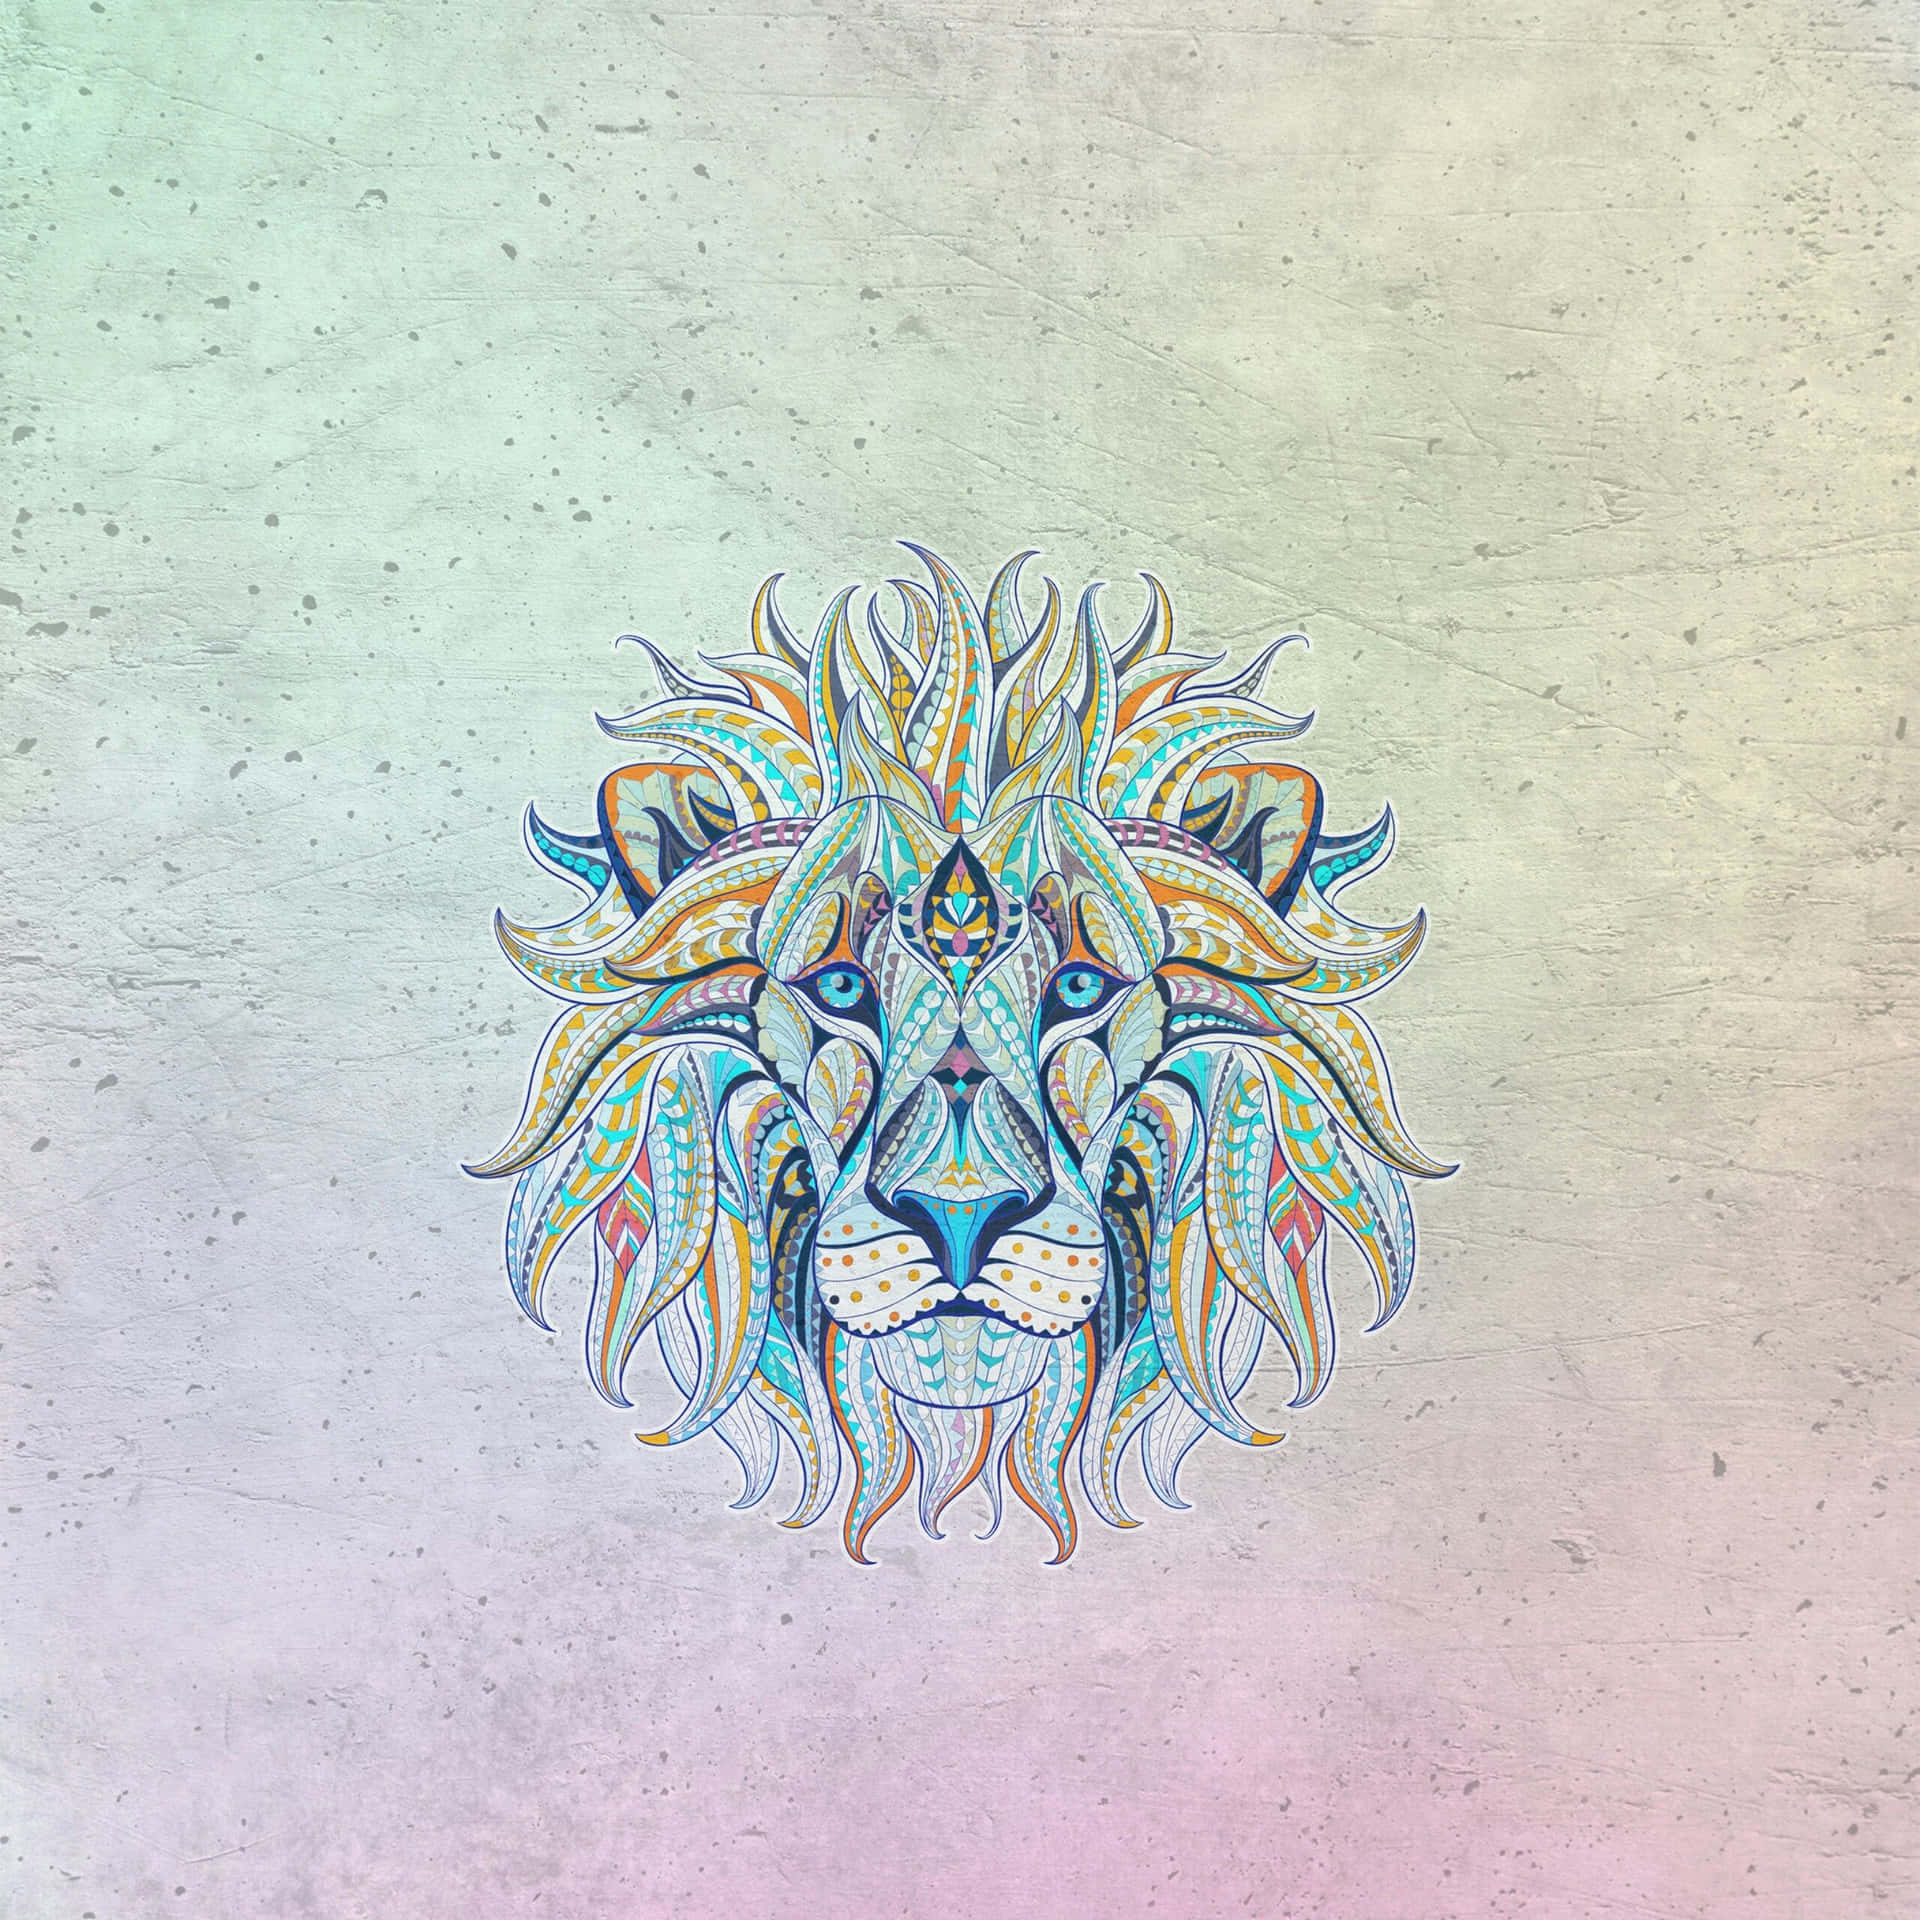 A Spectacular Abstract Image of a Lion Wallpaper